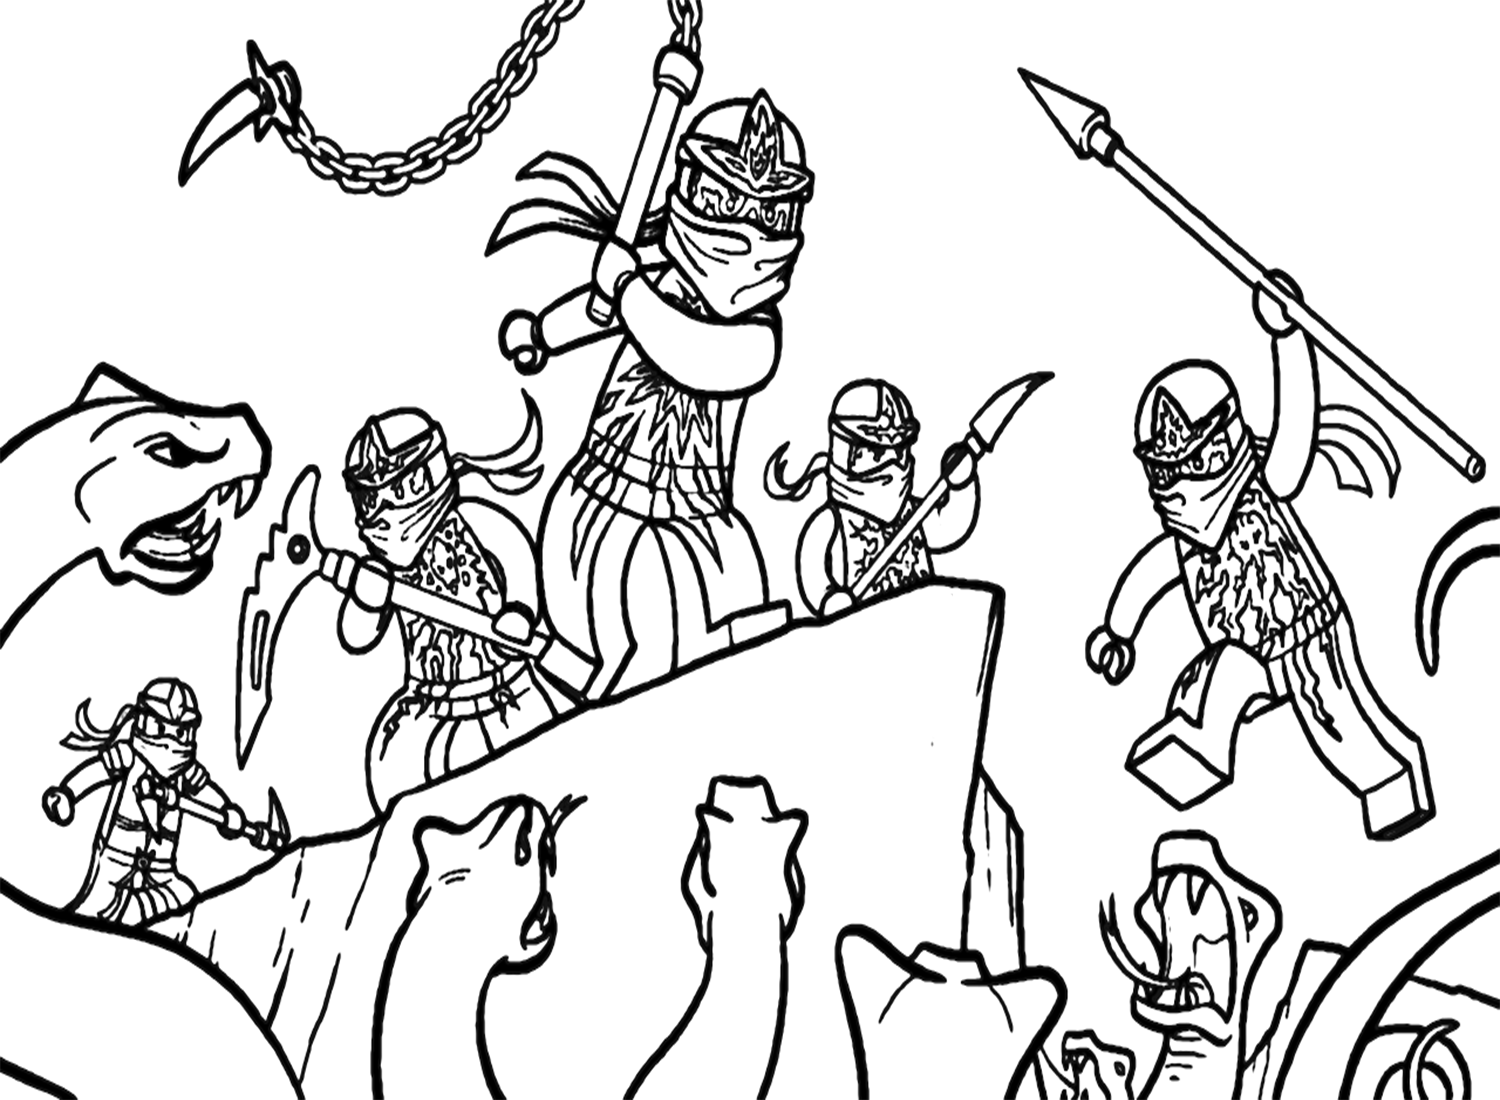 Evil Ninja Fights To The Anacondrai From Lego Ninjago Coloring Pages